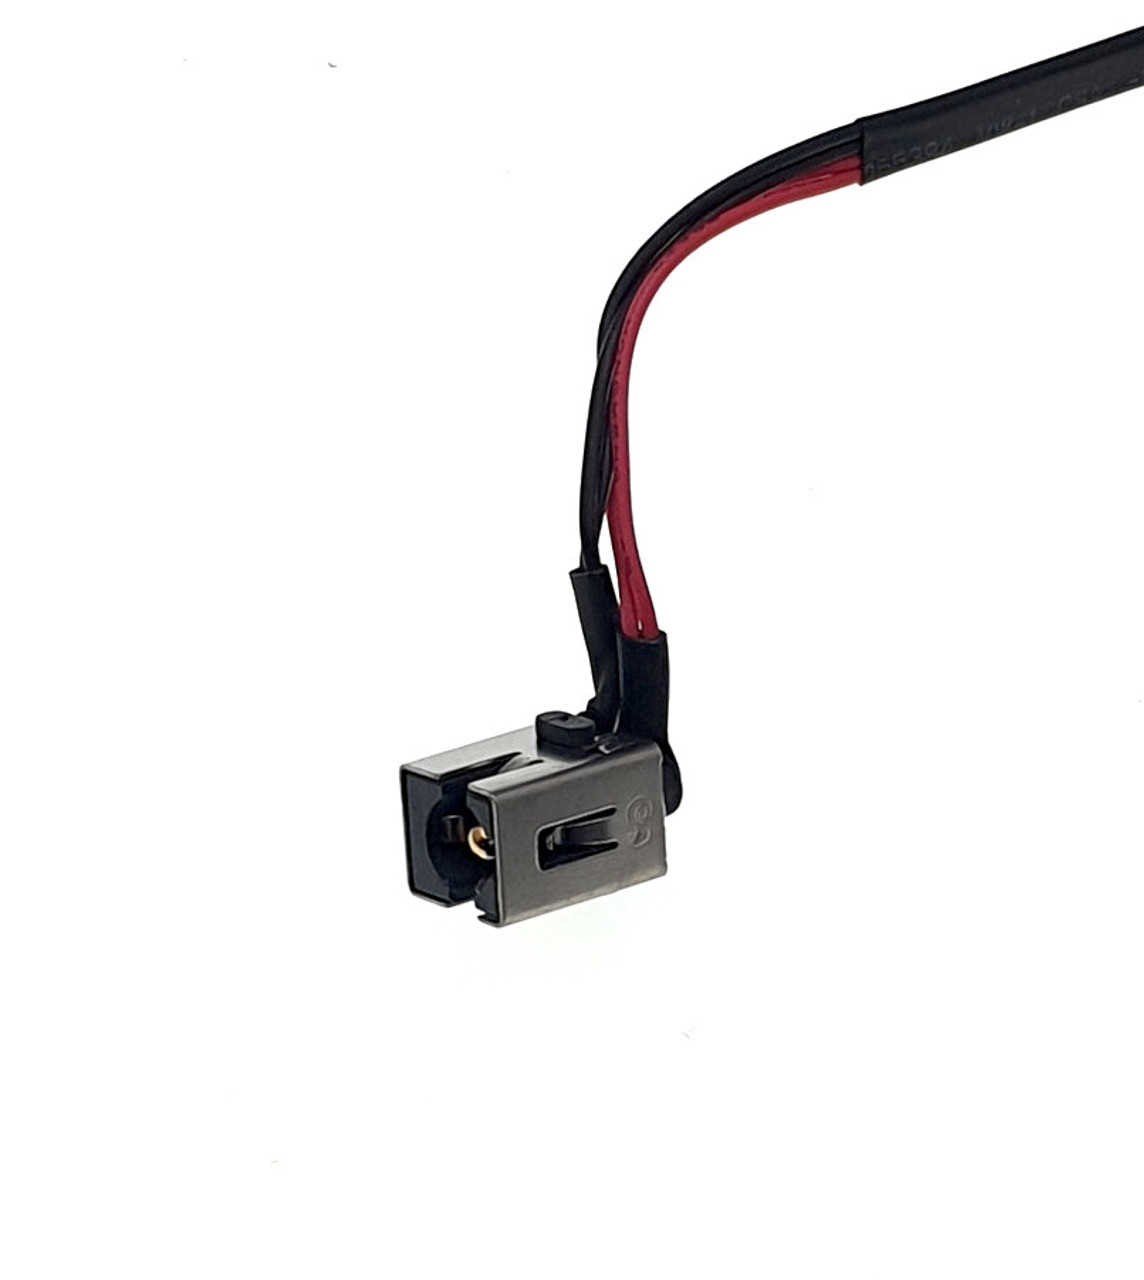 DC-IN Power Jack Socket Connector Plug Port With Cable Wire Harness DC30100KS00 For Lenovo Ideapad U510 Laptop Notebook